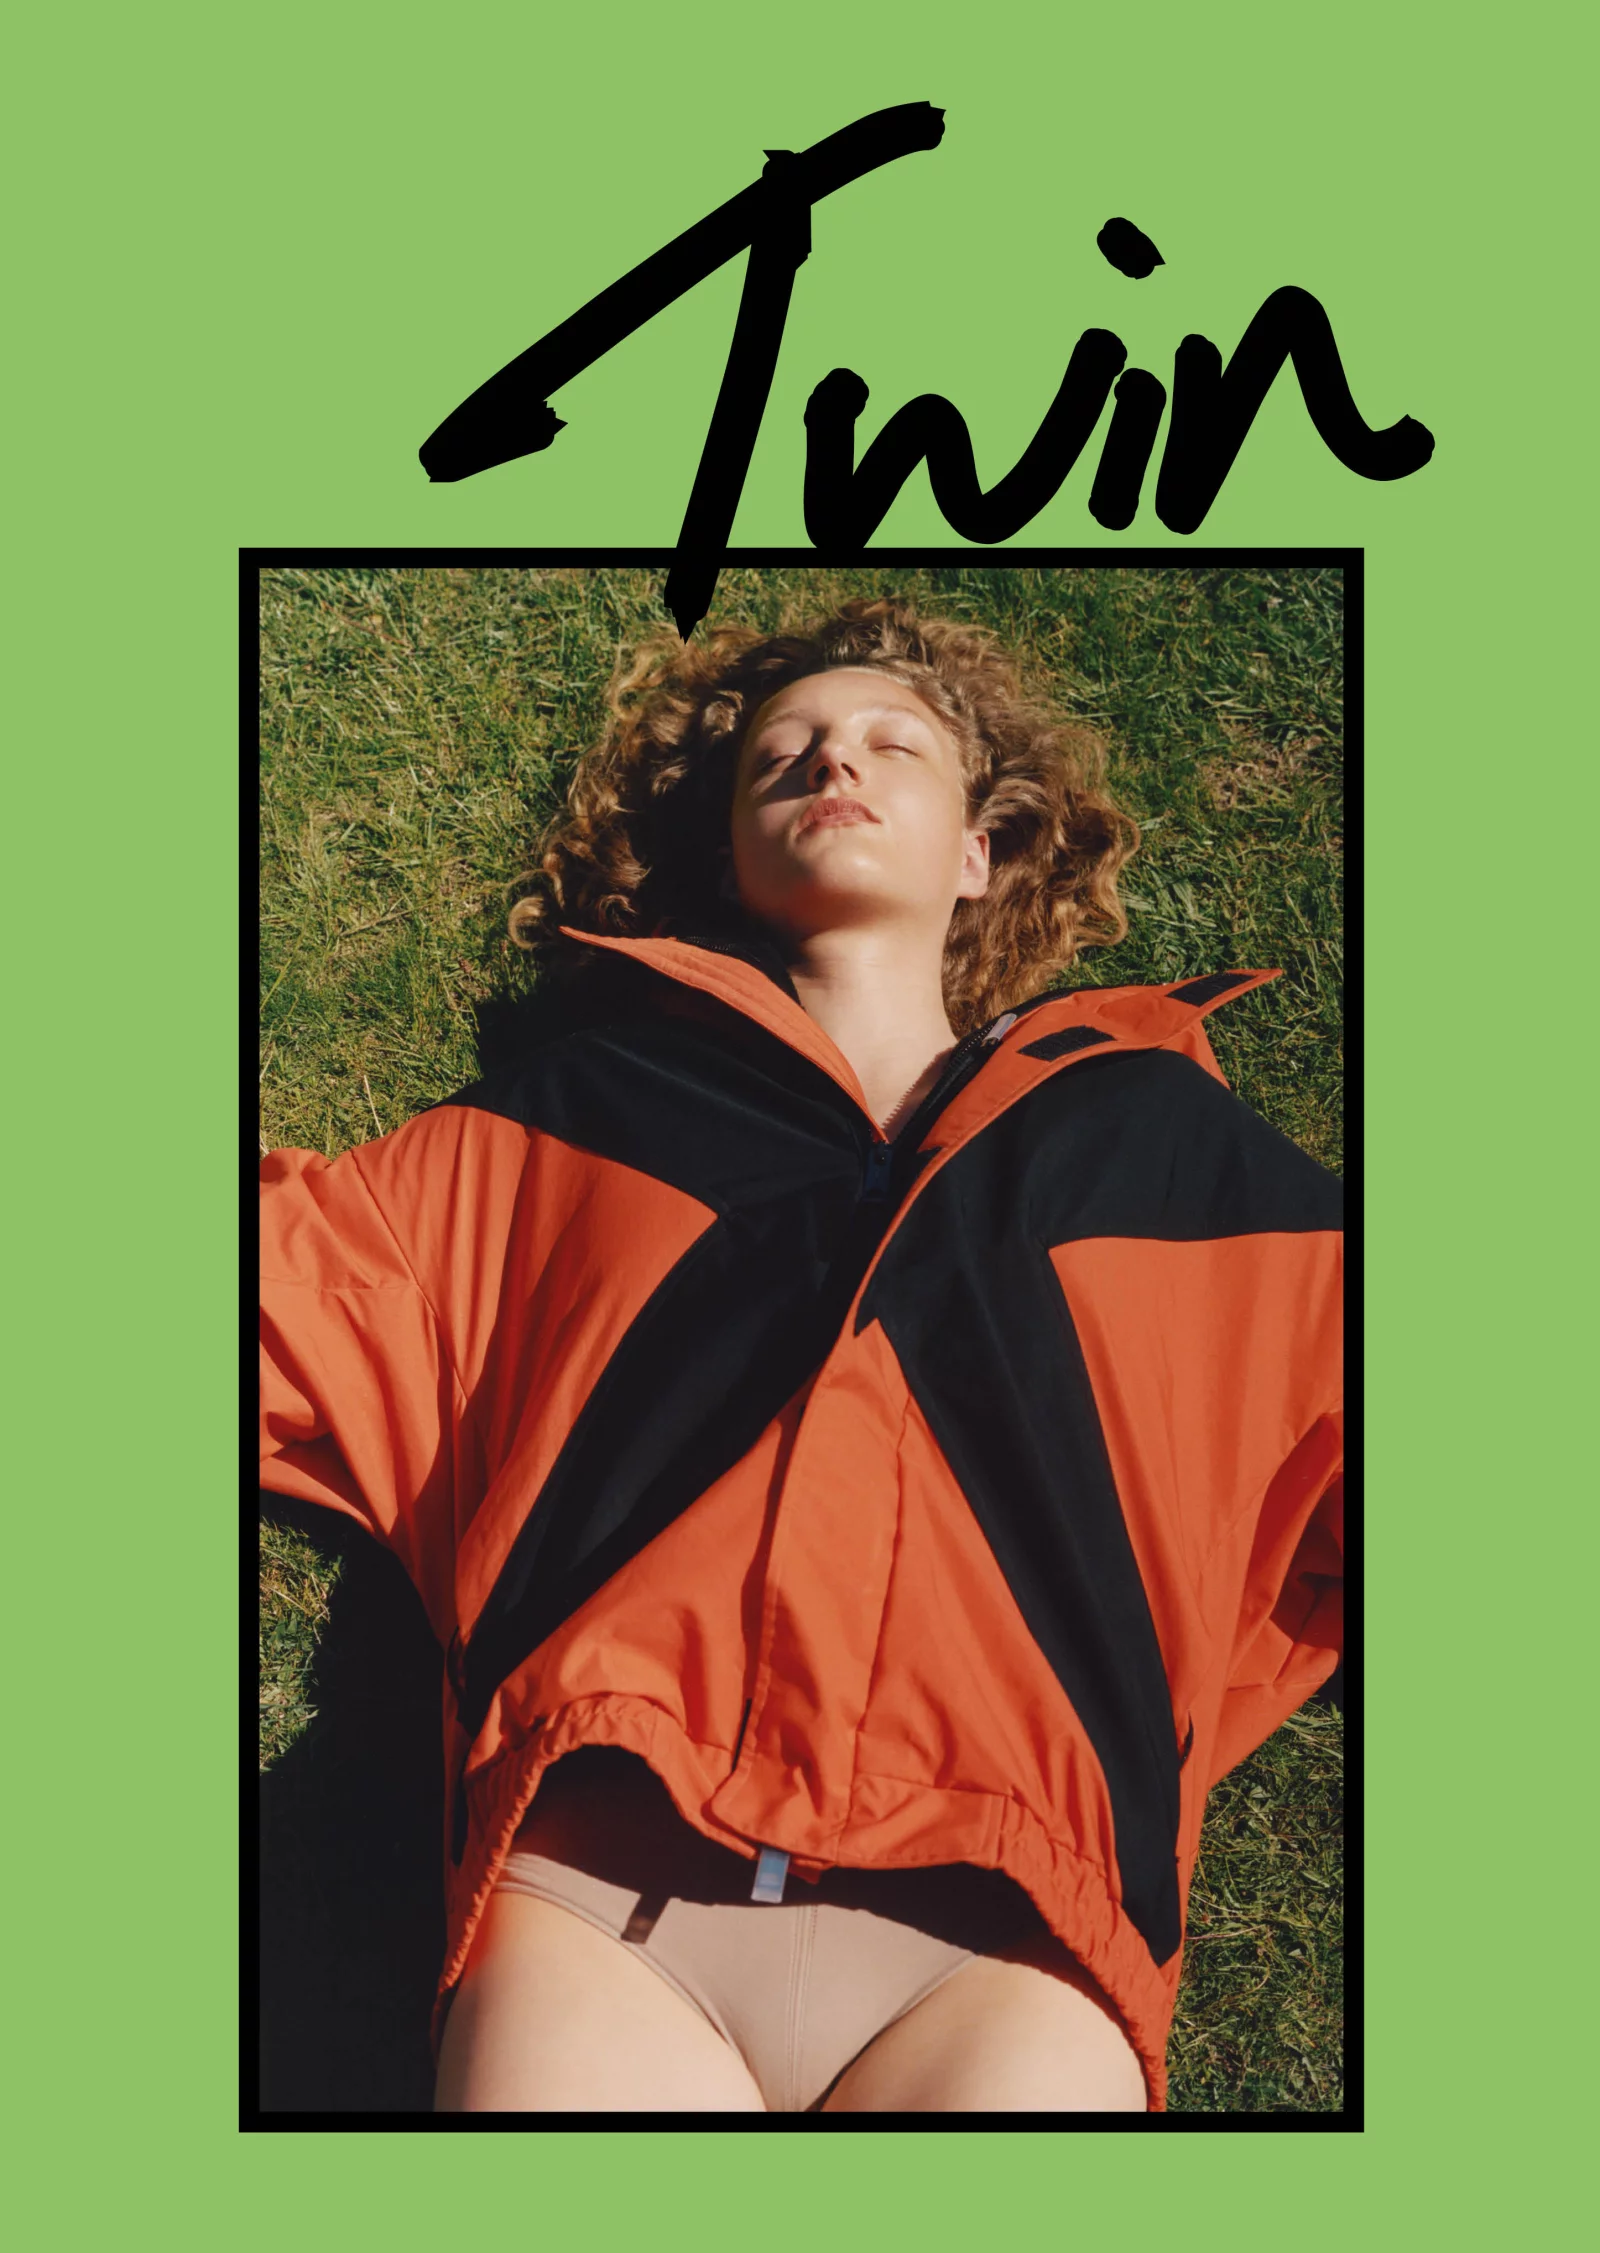 Twin Magazine 1 by Théophile HERMAND